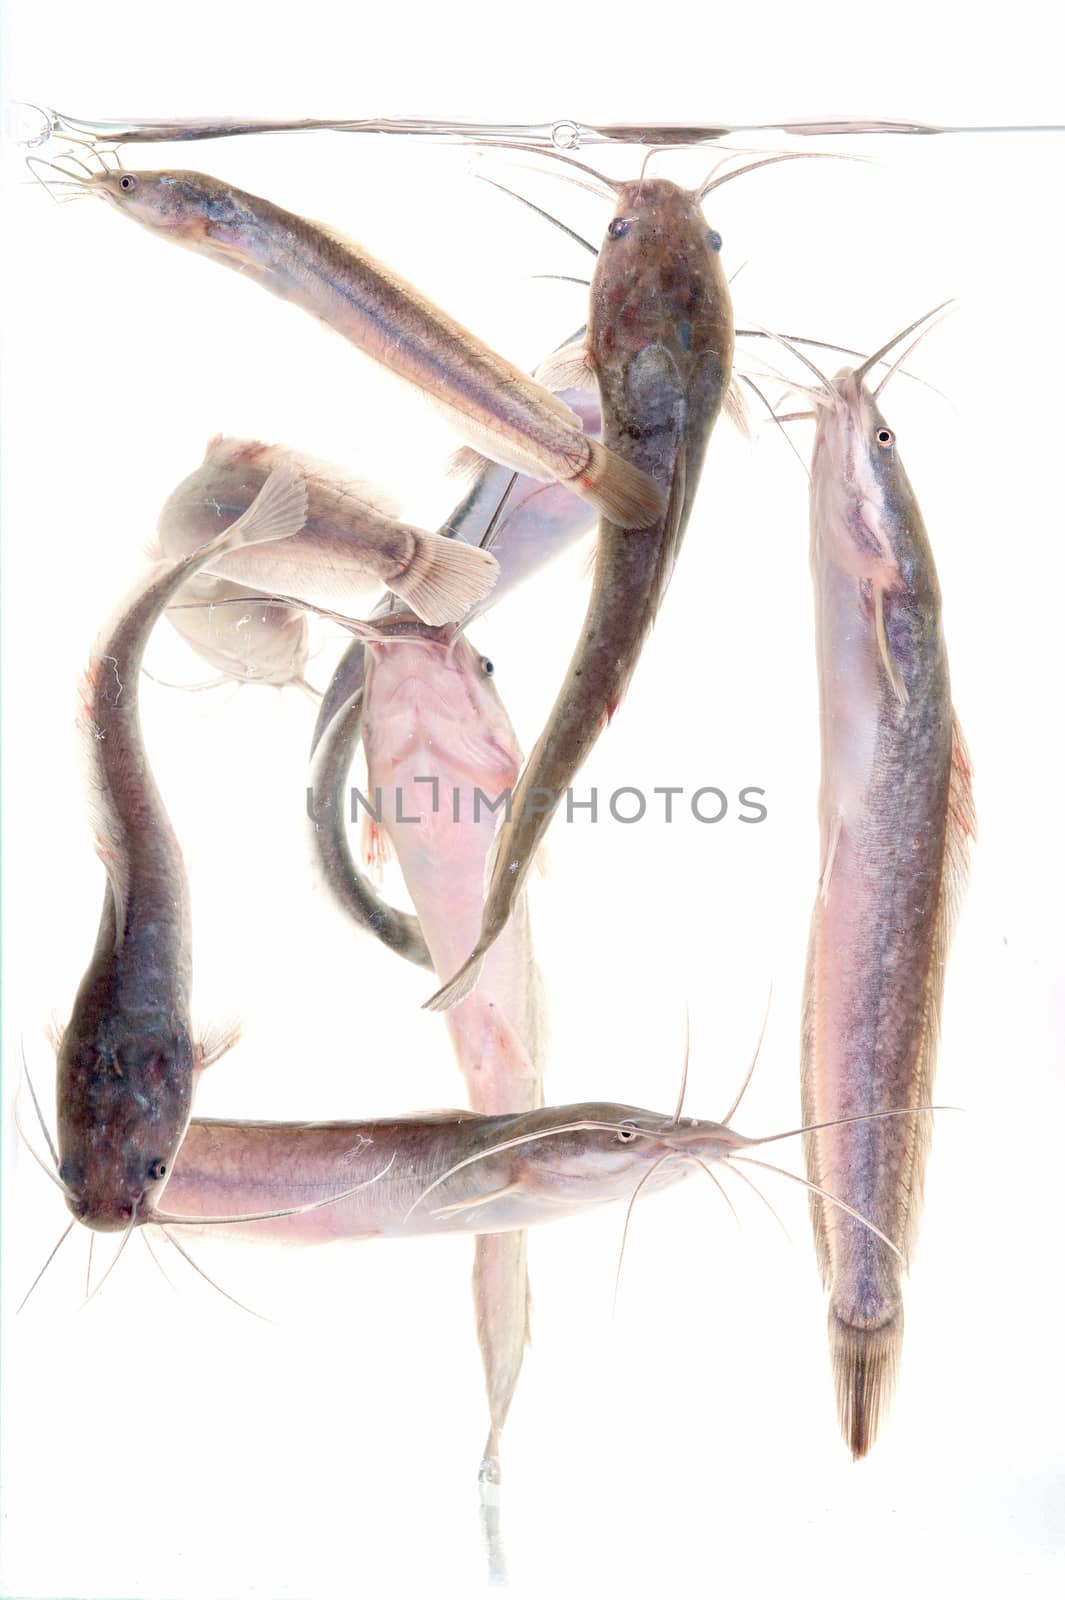 group of catfish in tank